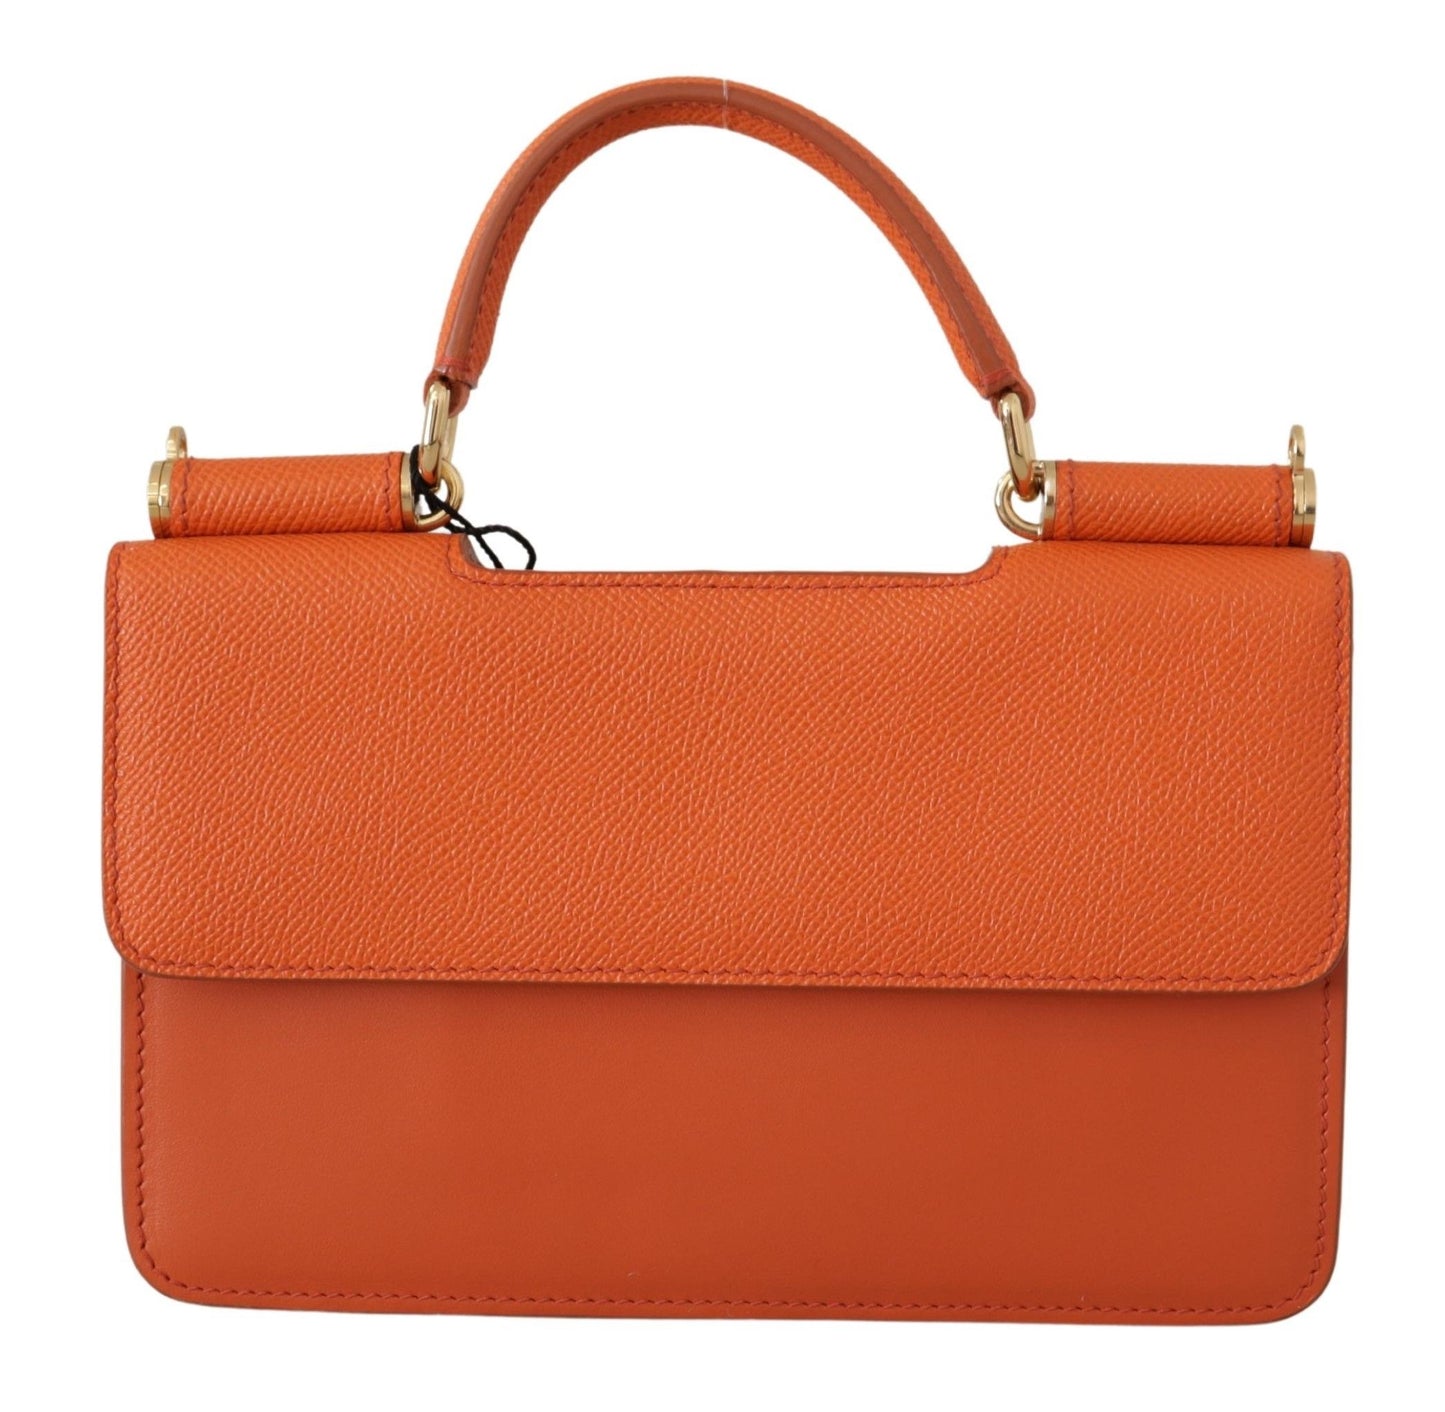 Exquisite Orange Leather Clutch with Gold Accents